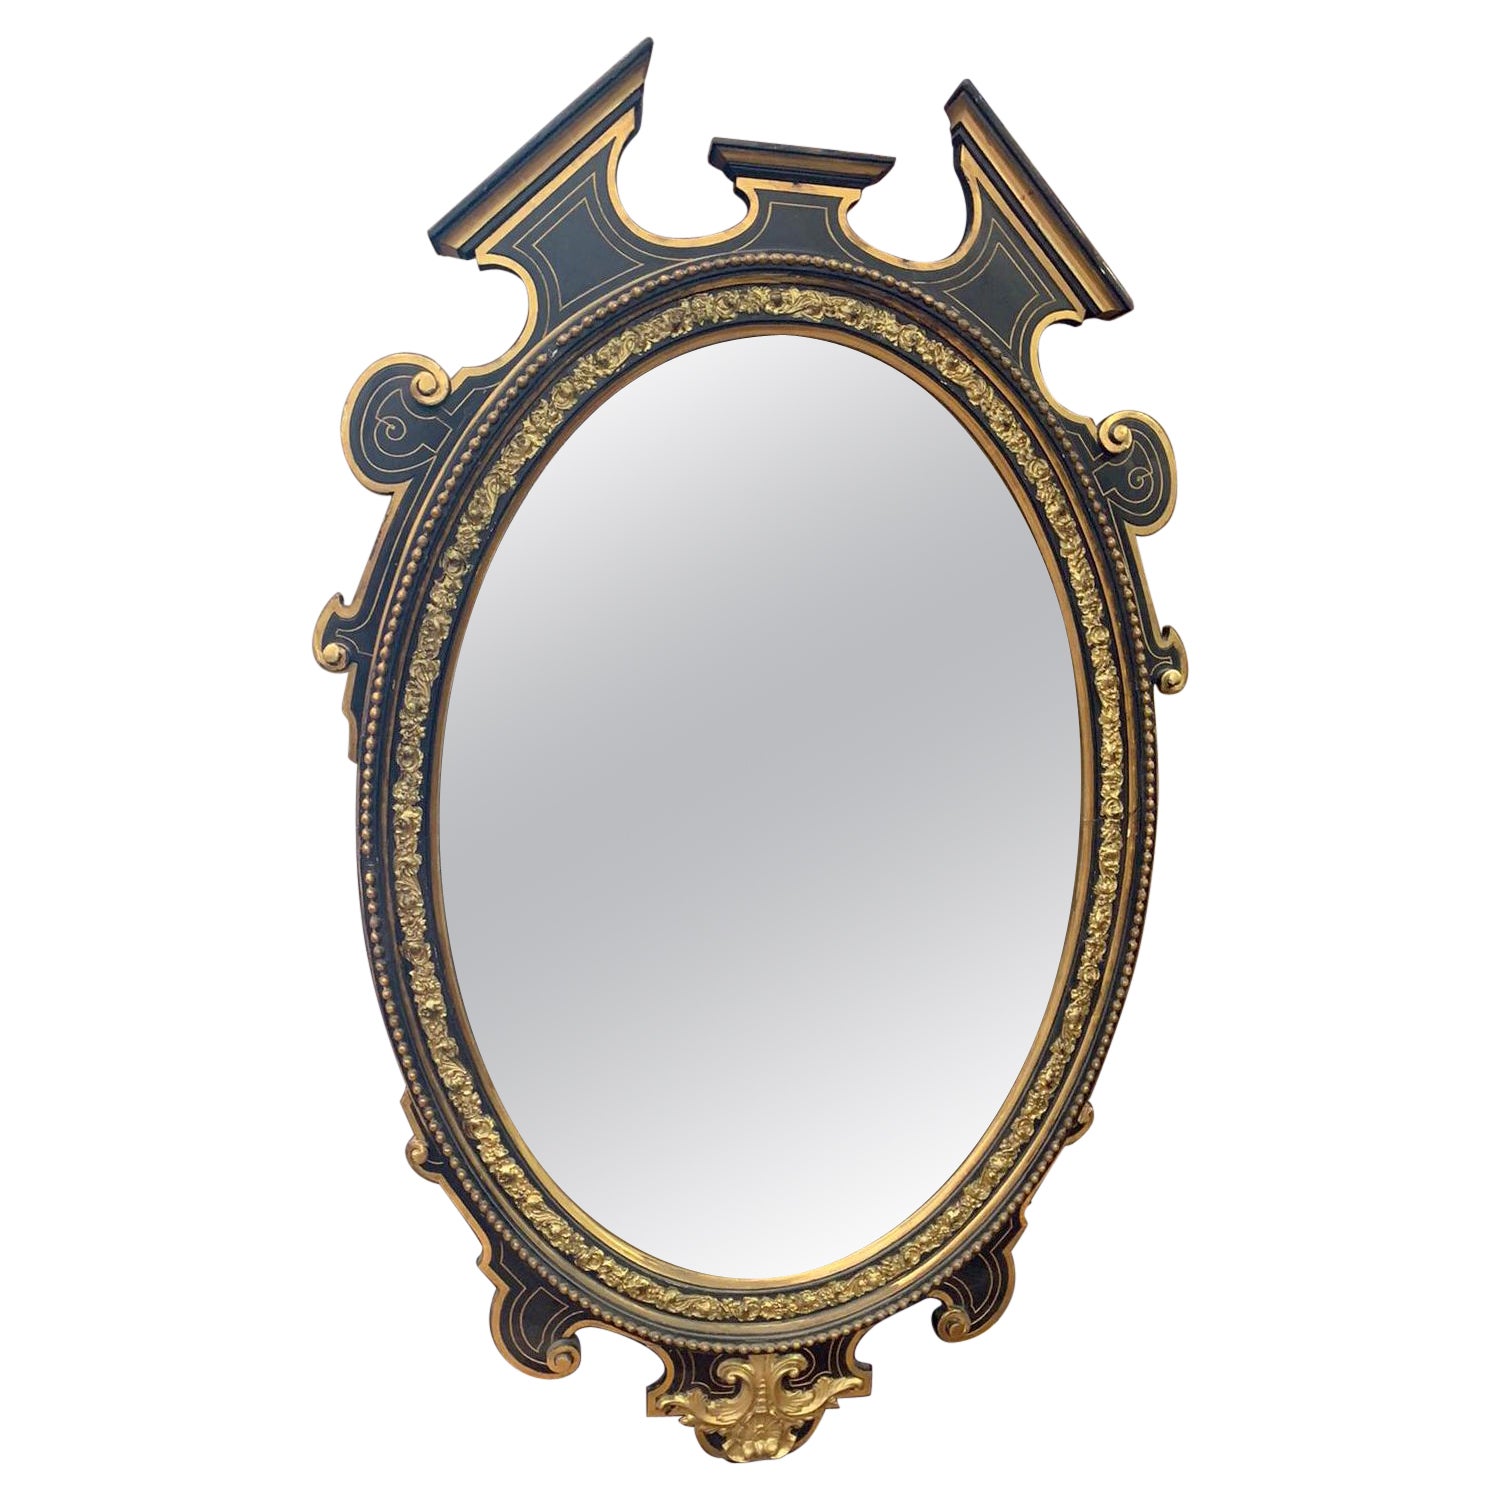 Big Oval Mirror, Black and Gold with Carved Frills, Late 19th Century Italy